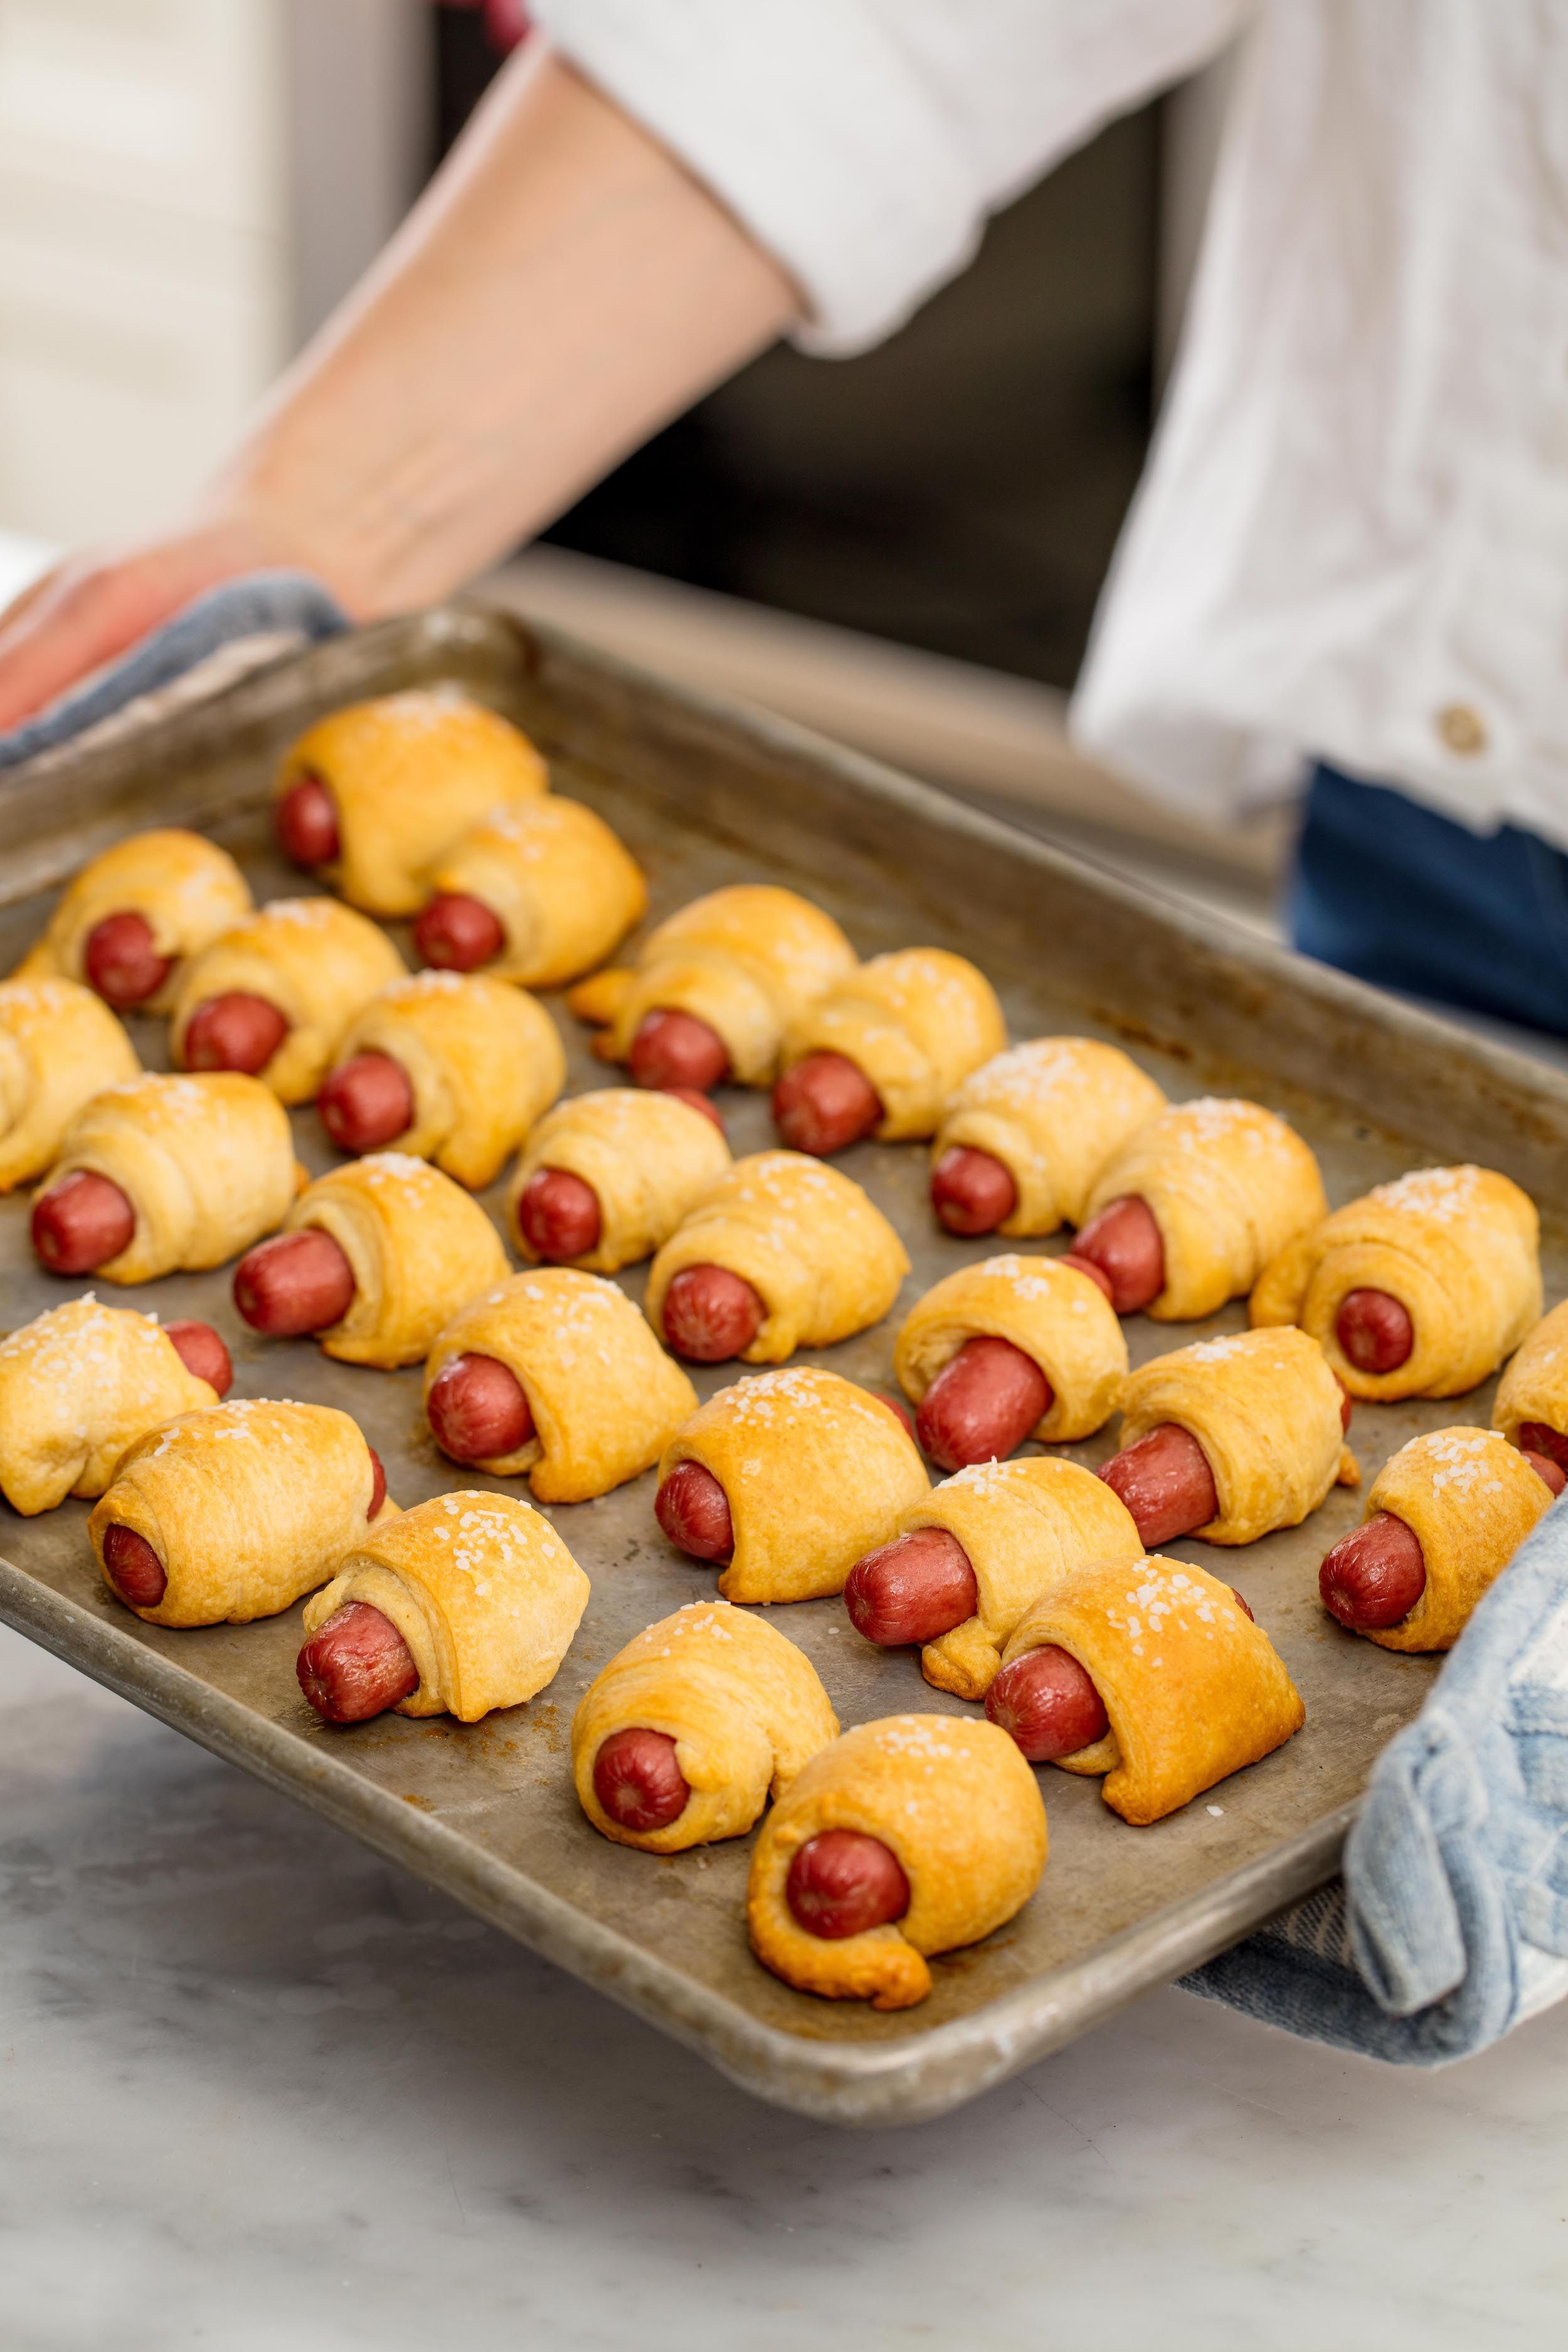 Best Pigs In A Blanket Recipe How To Make Homemade Pigs In A Blanket